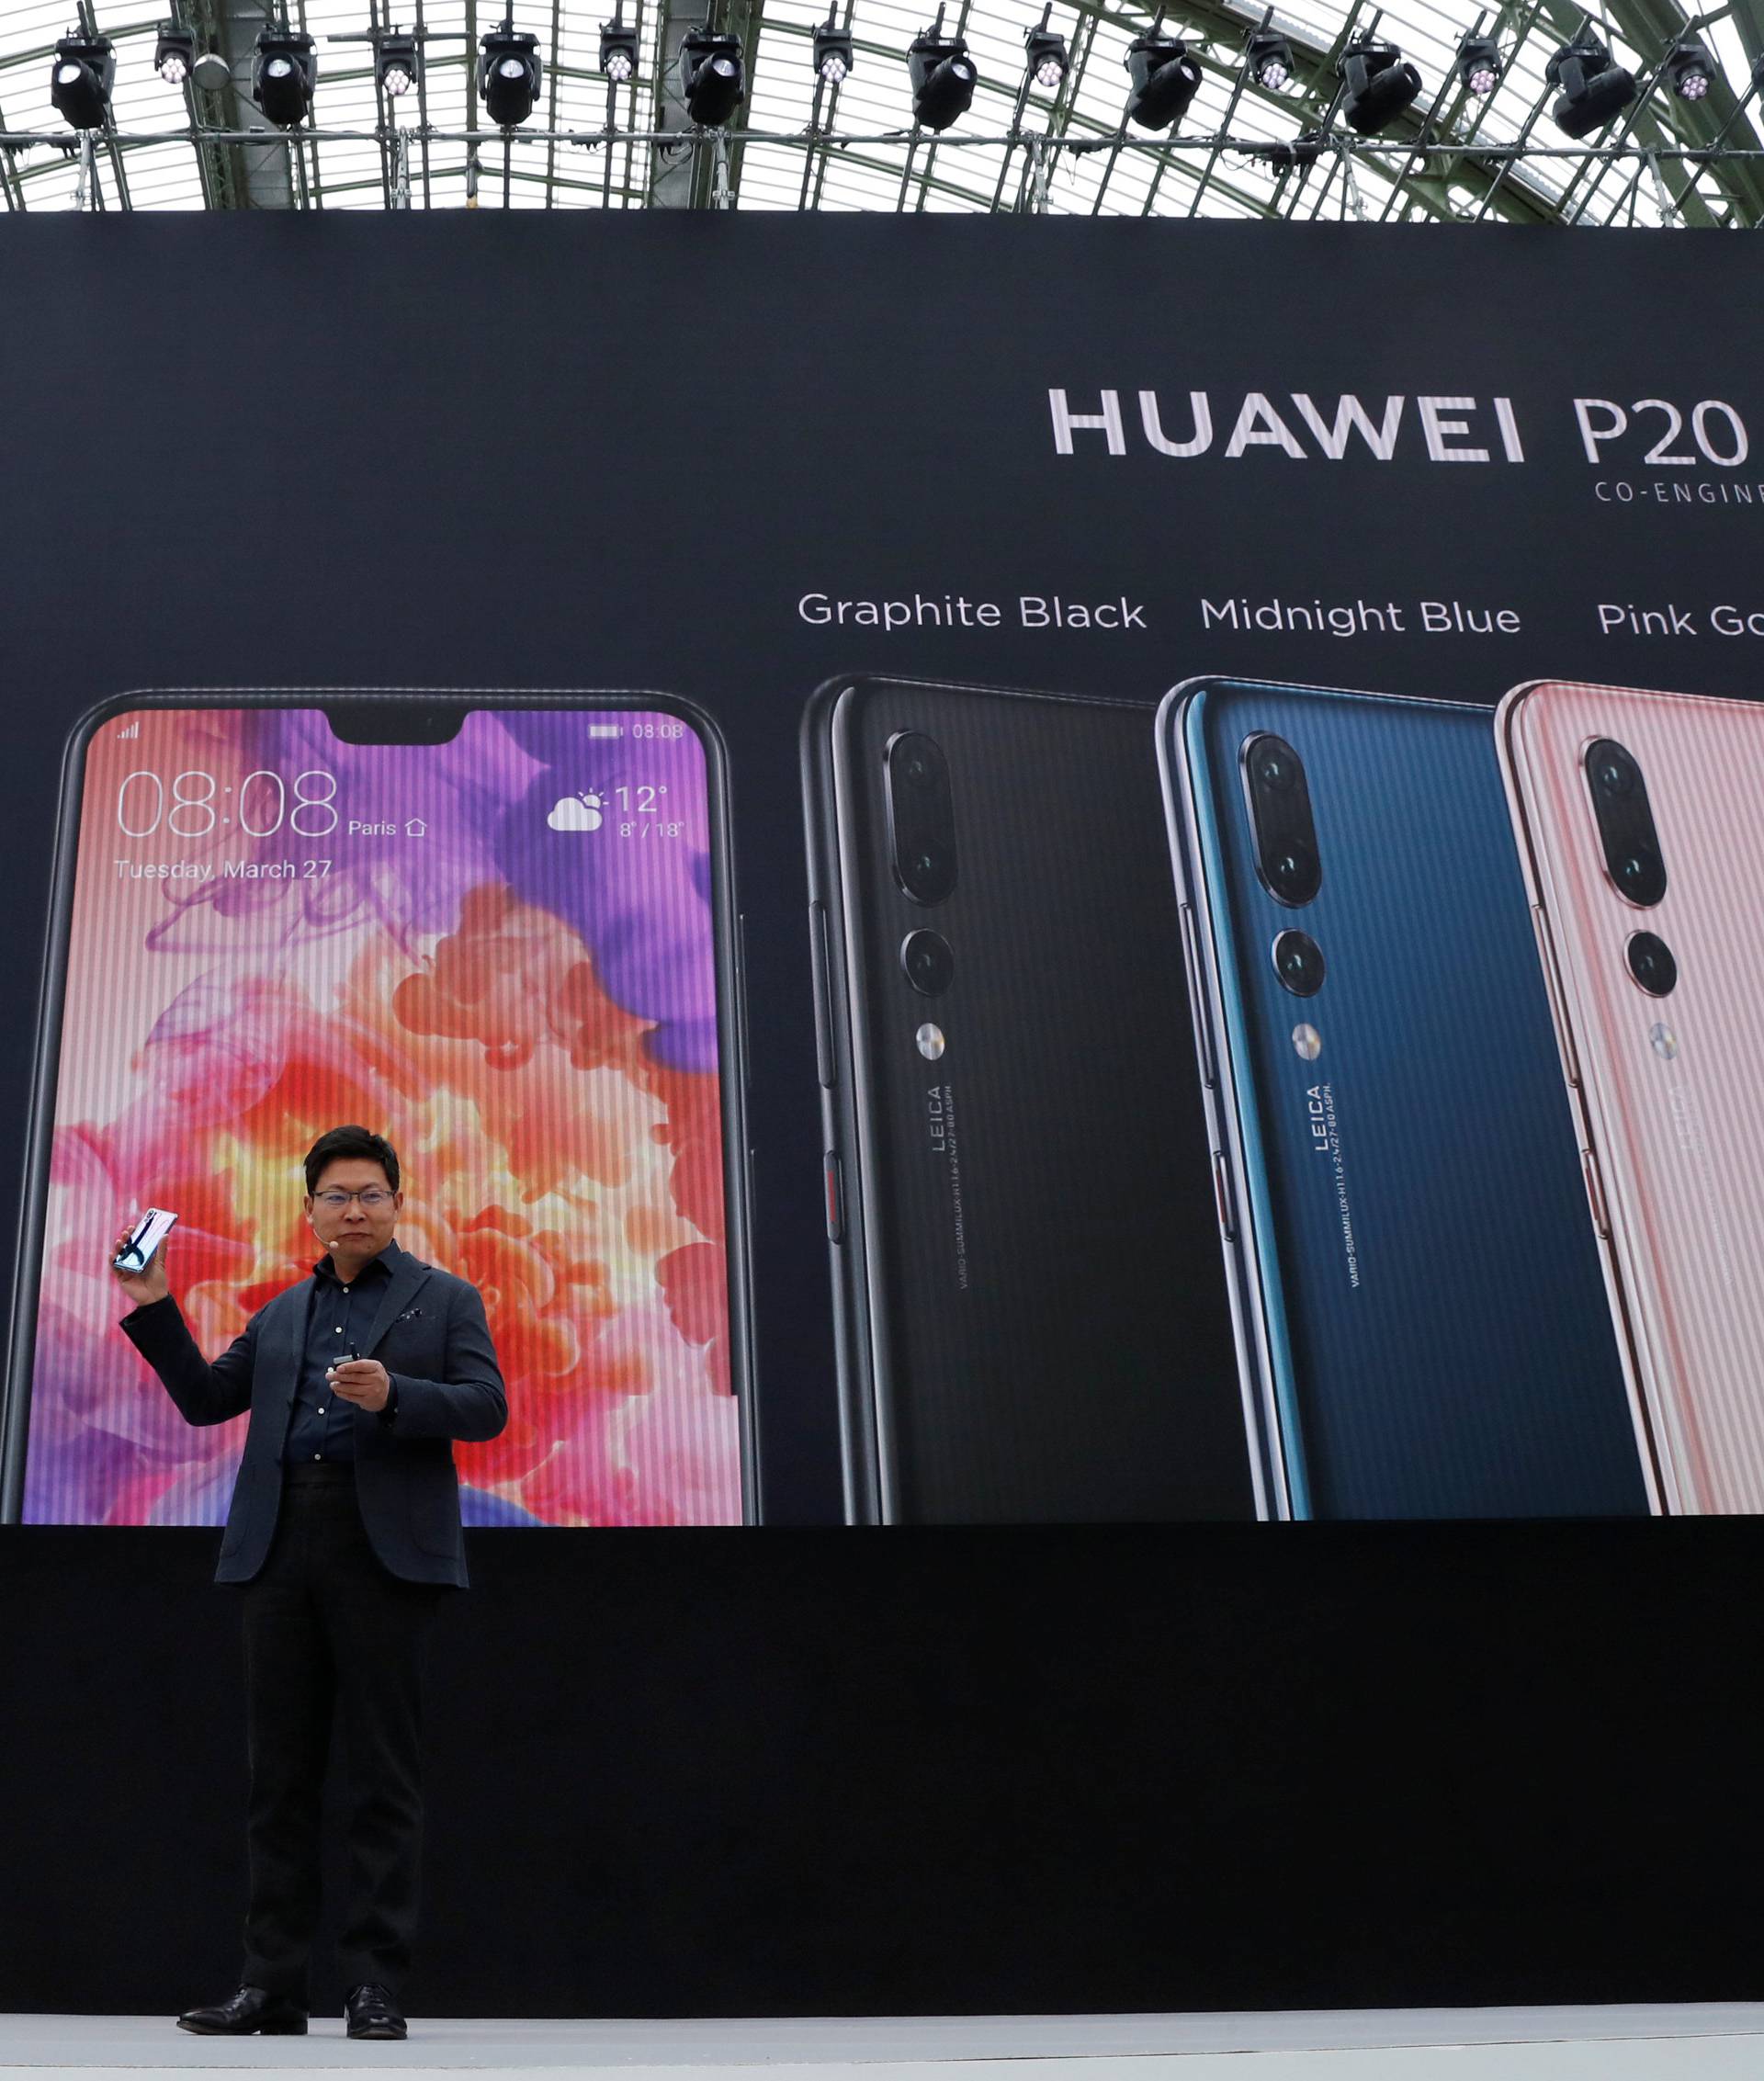 Richard Yu, CEO of the Huawei Consumer Business Group, attends the launching the new generation of its smartphone, Huawei P20, in Paris